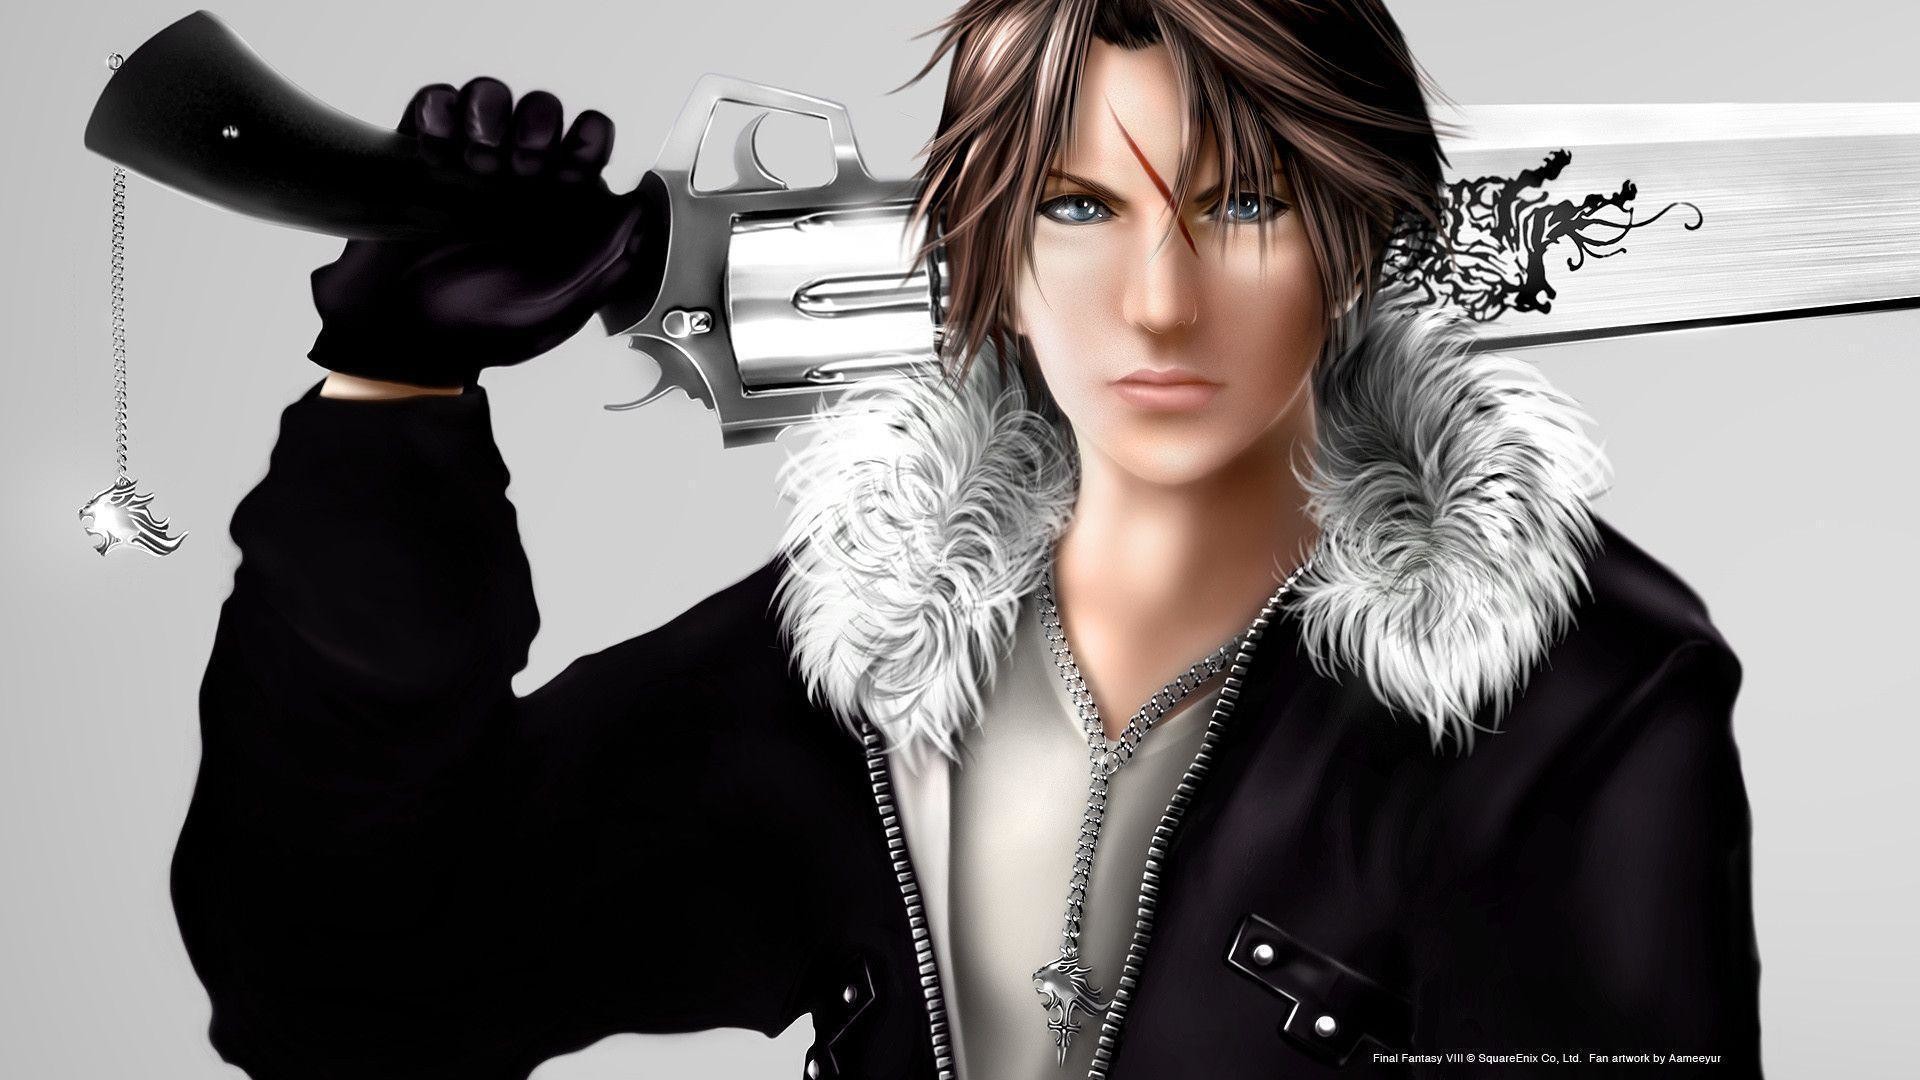 1920x1080 DeviantArt: More Like Squall Leonhart by Aameeyur